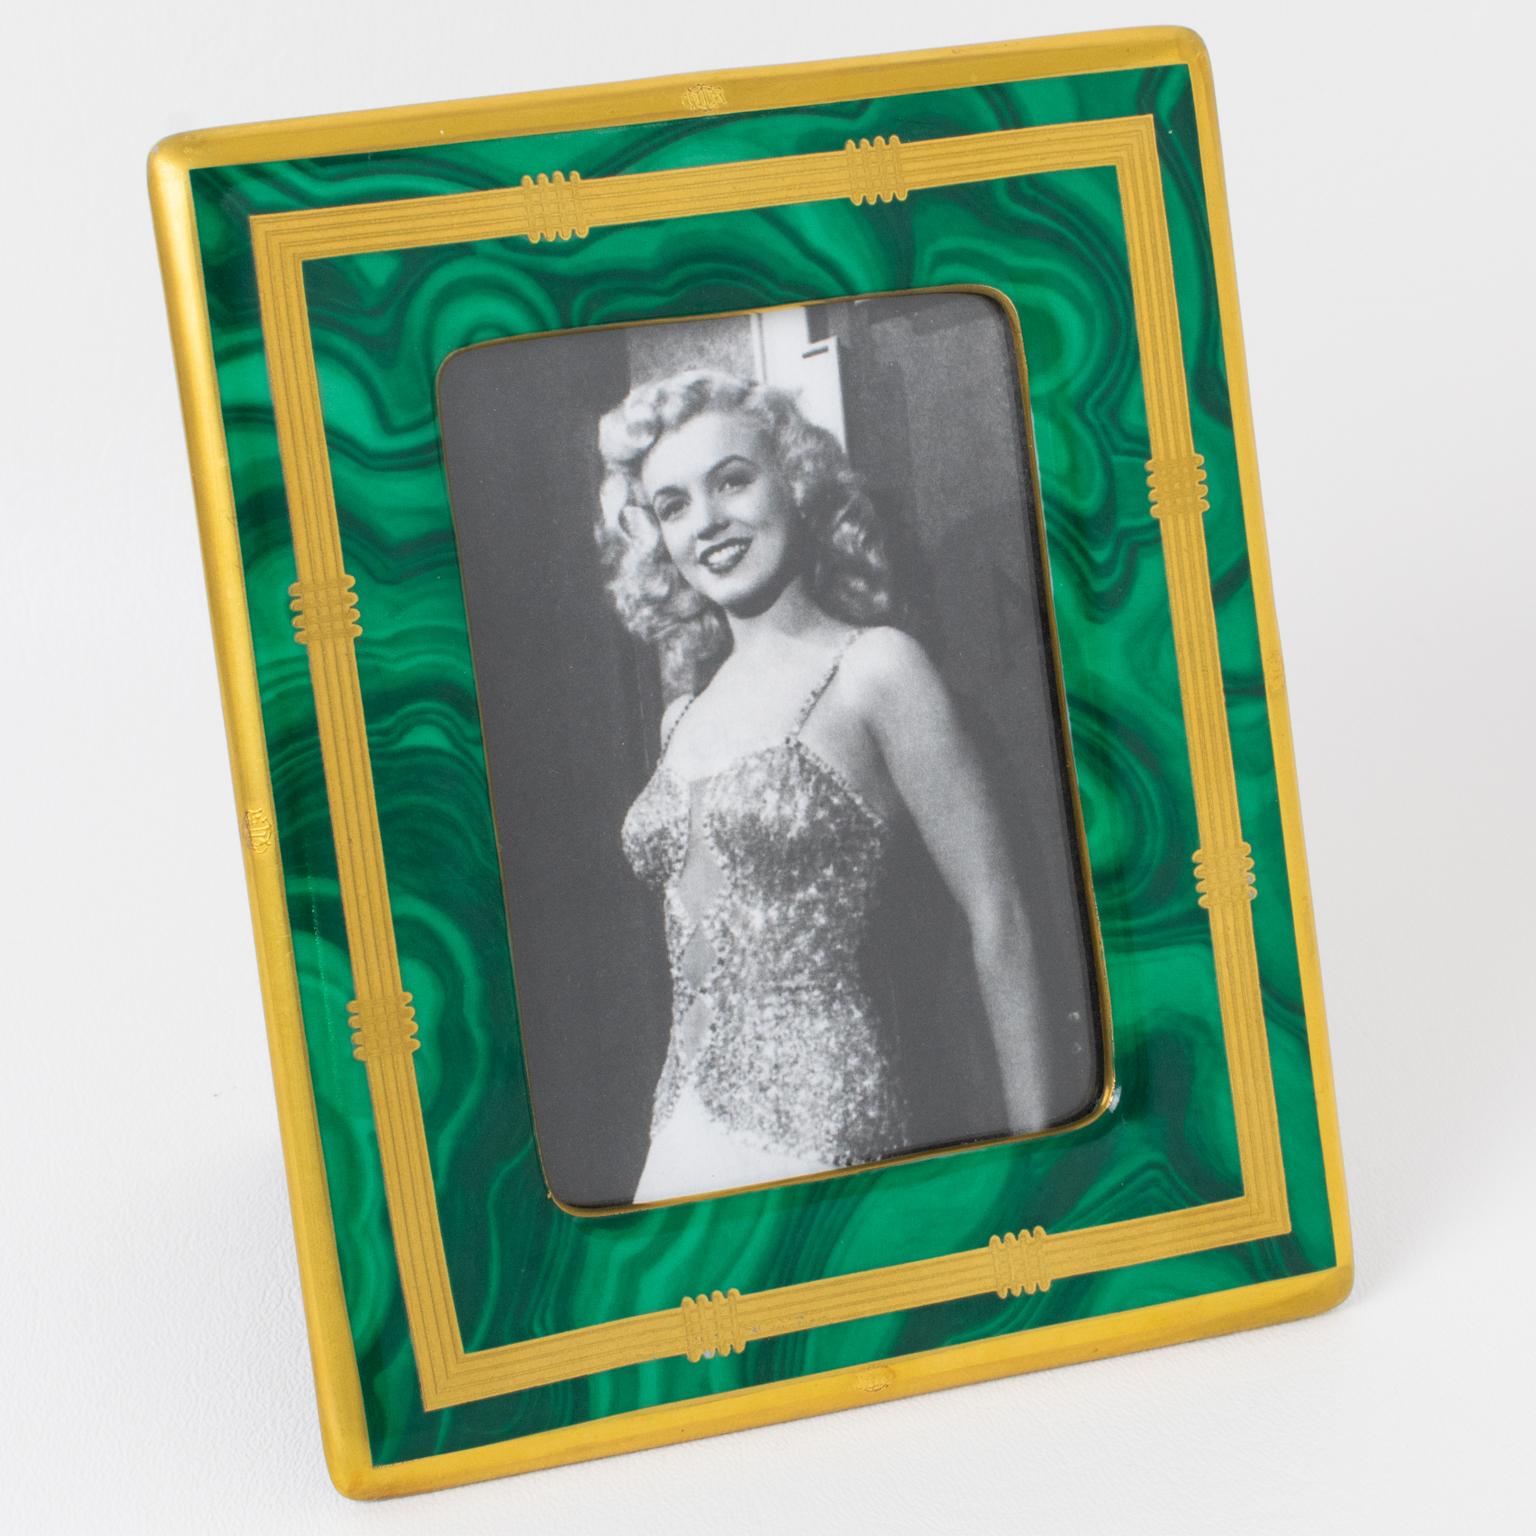 This lovely decorative picture photo frame was designed for the Christian Dior Home collection in the 1980s. The delicate ceramic slab has a Malachite-like textured pattern and gilt application. The easel and back are in felted black fabric. The